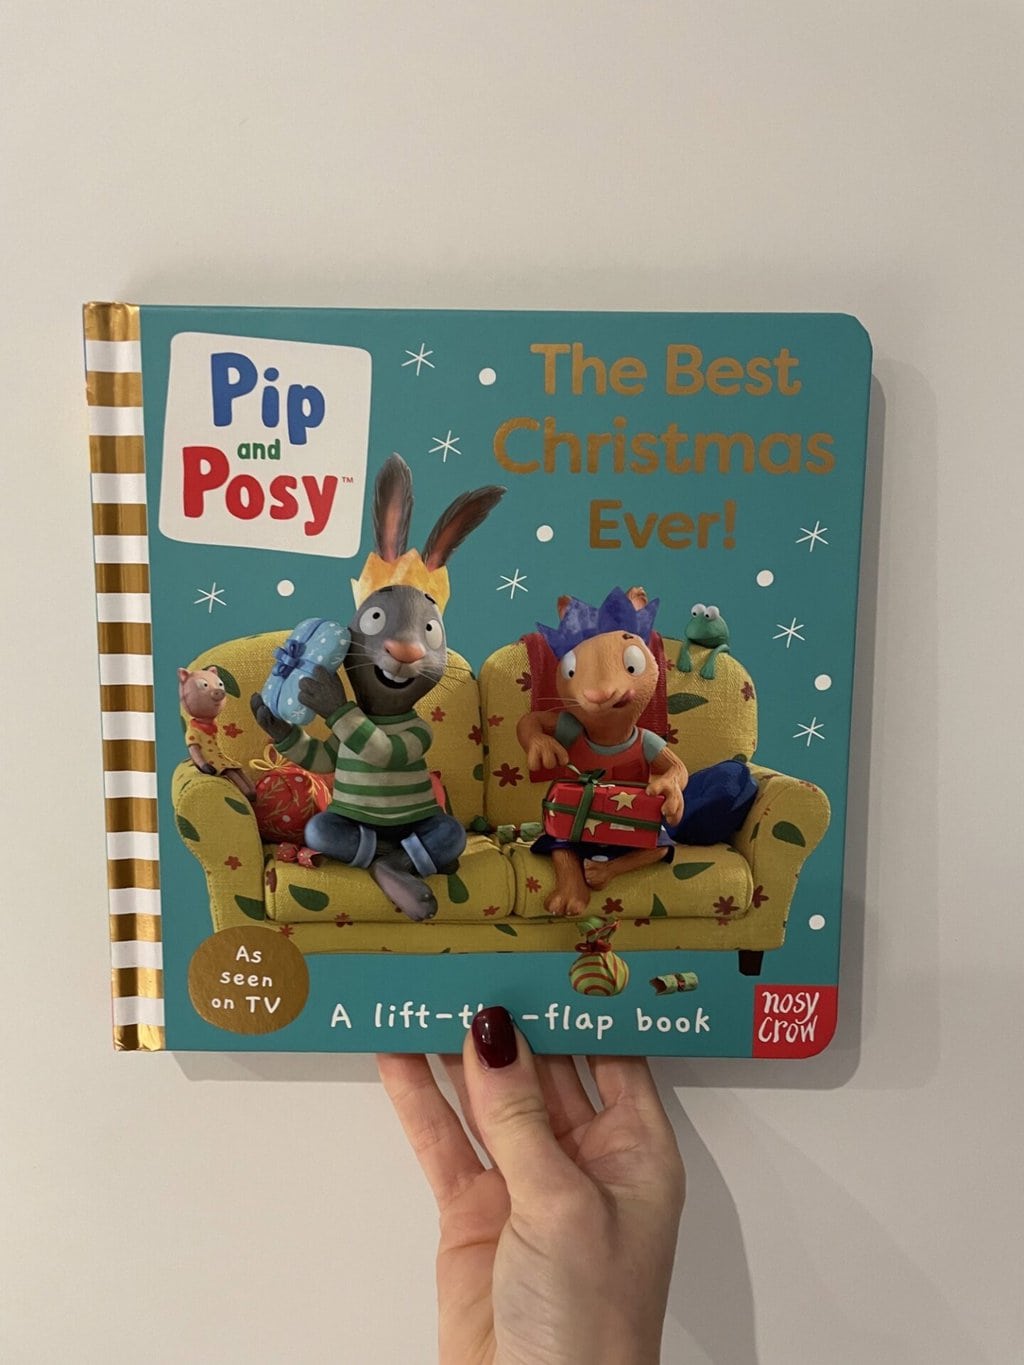 Pip and Posy – The Best Christmas Ever!  